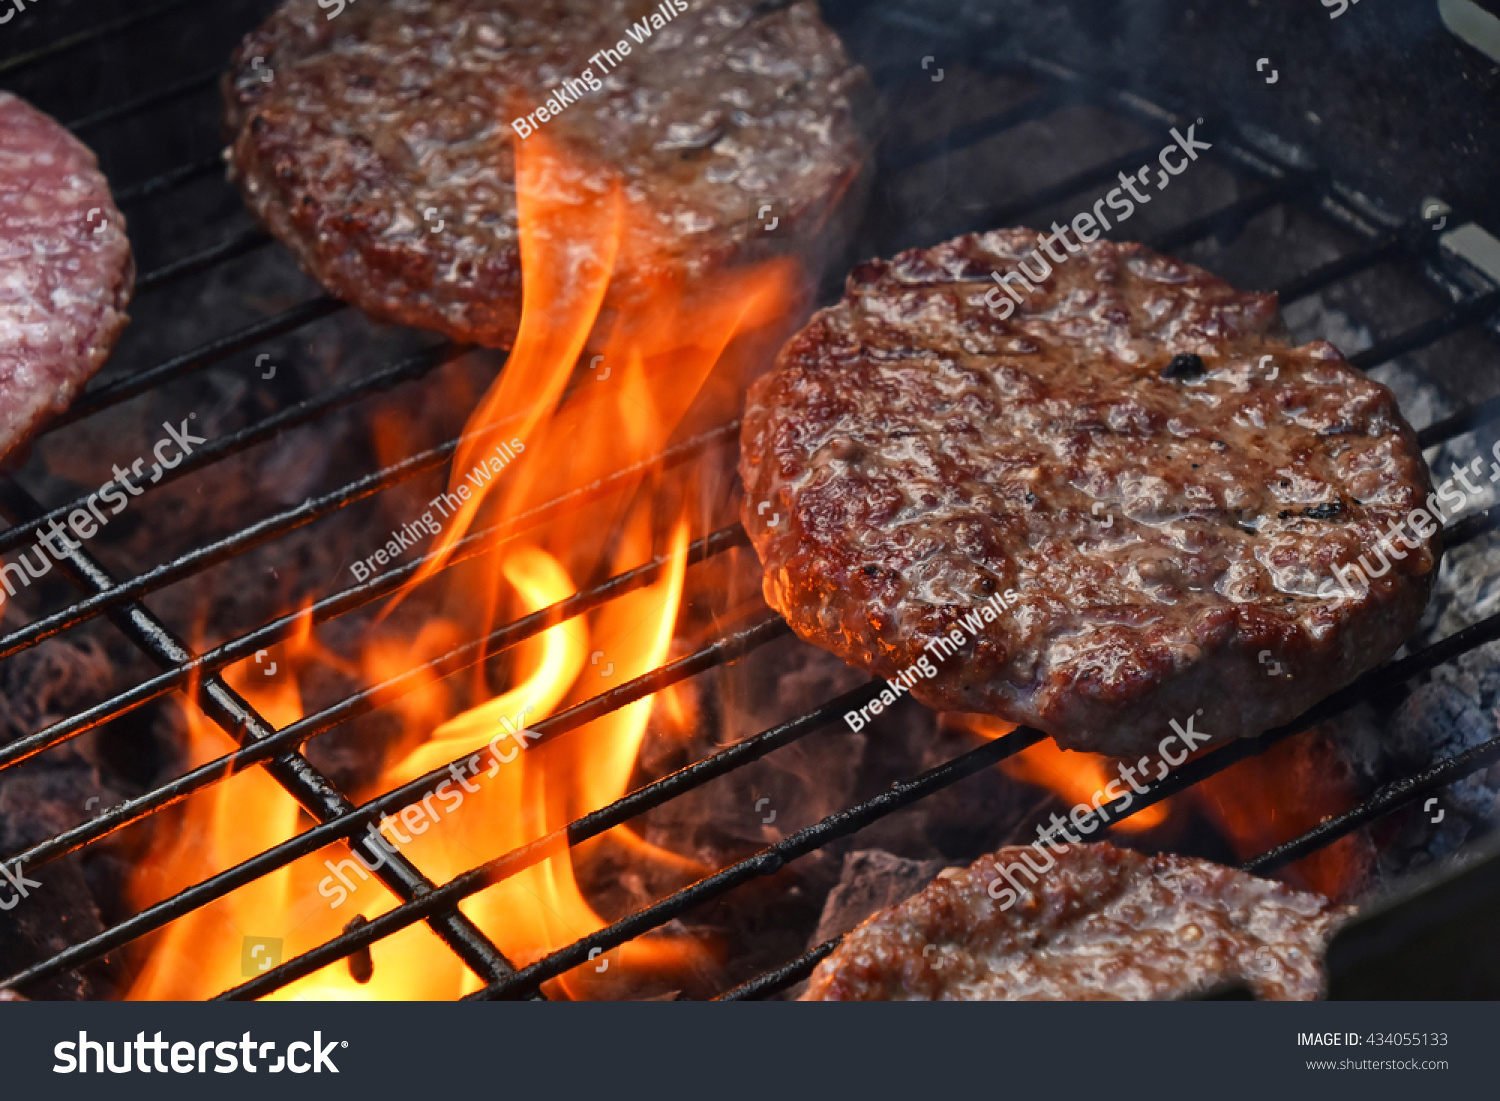 Beef Or Pork Meat Barbecue Burgers For Hamburger Prepared Grilled On ...